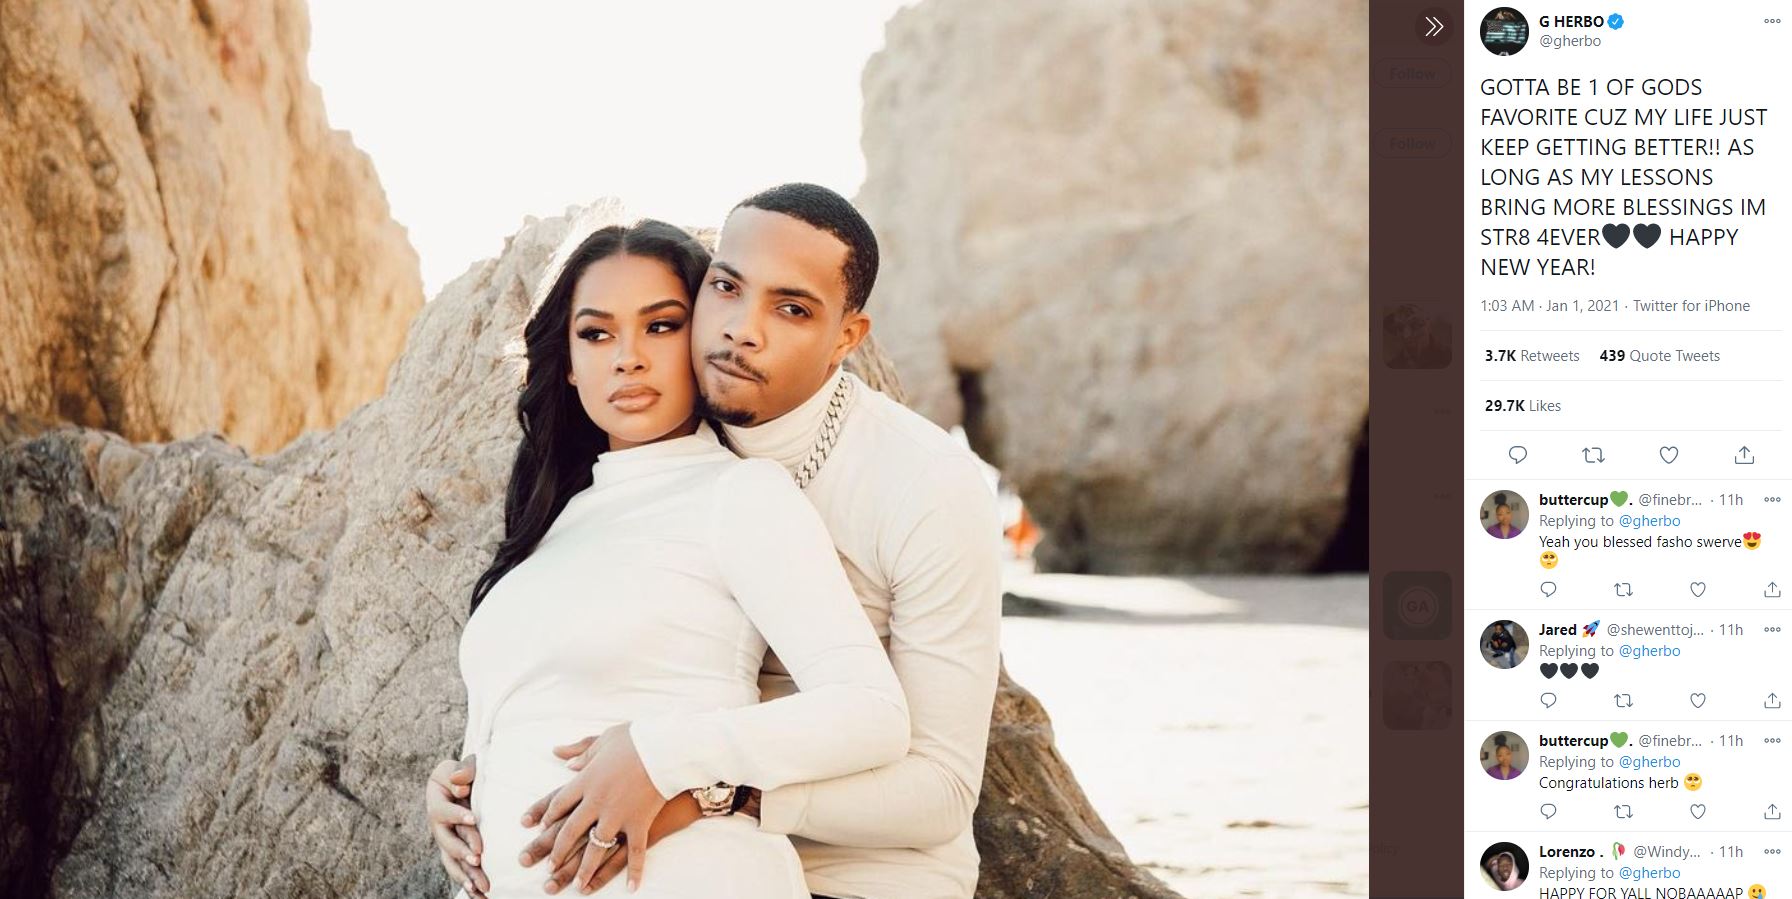 Chicago rapper G Herbo and fiancée Taina Williams expecting their 1st